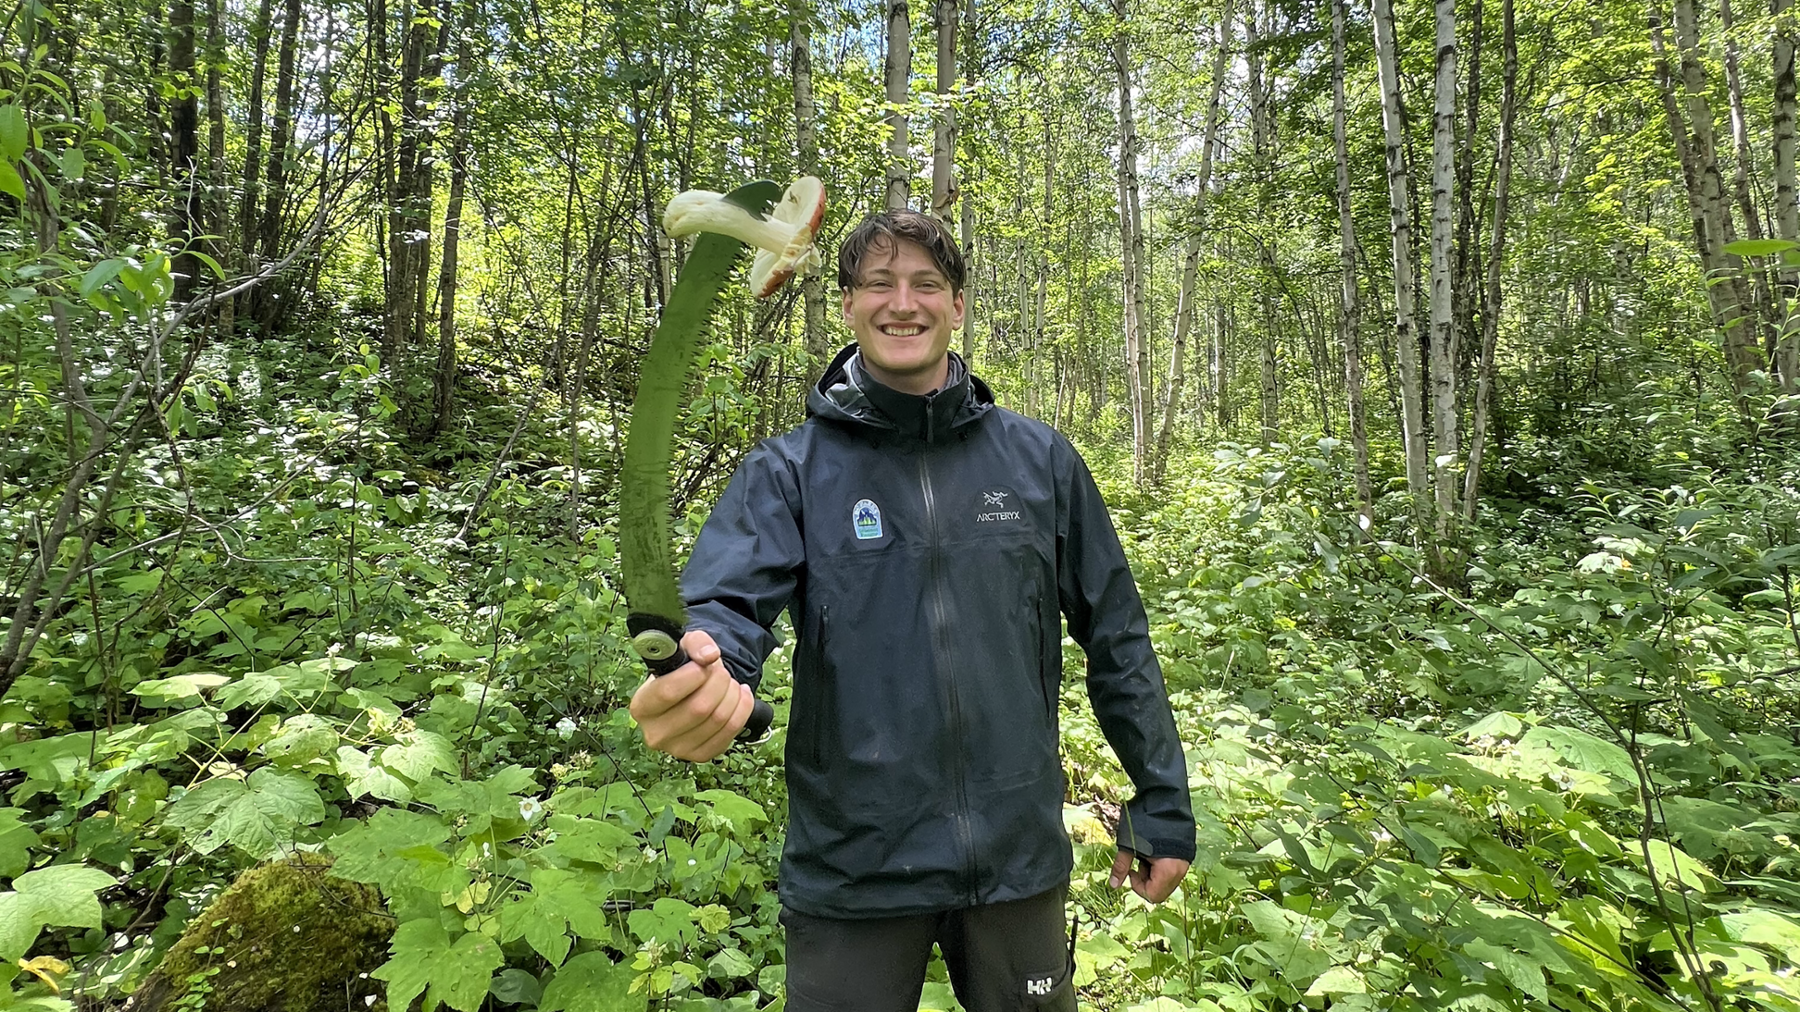 Karl Hare, a co-op student, is standing very happily in the forest, dressed in a waterproof black jacket and black trousers. He is holding up a large serrated knife, on which is impaled a giant white mushroom.